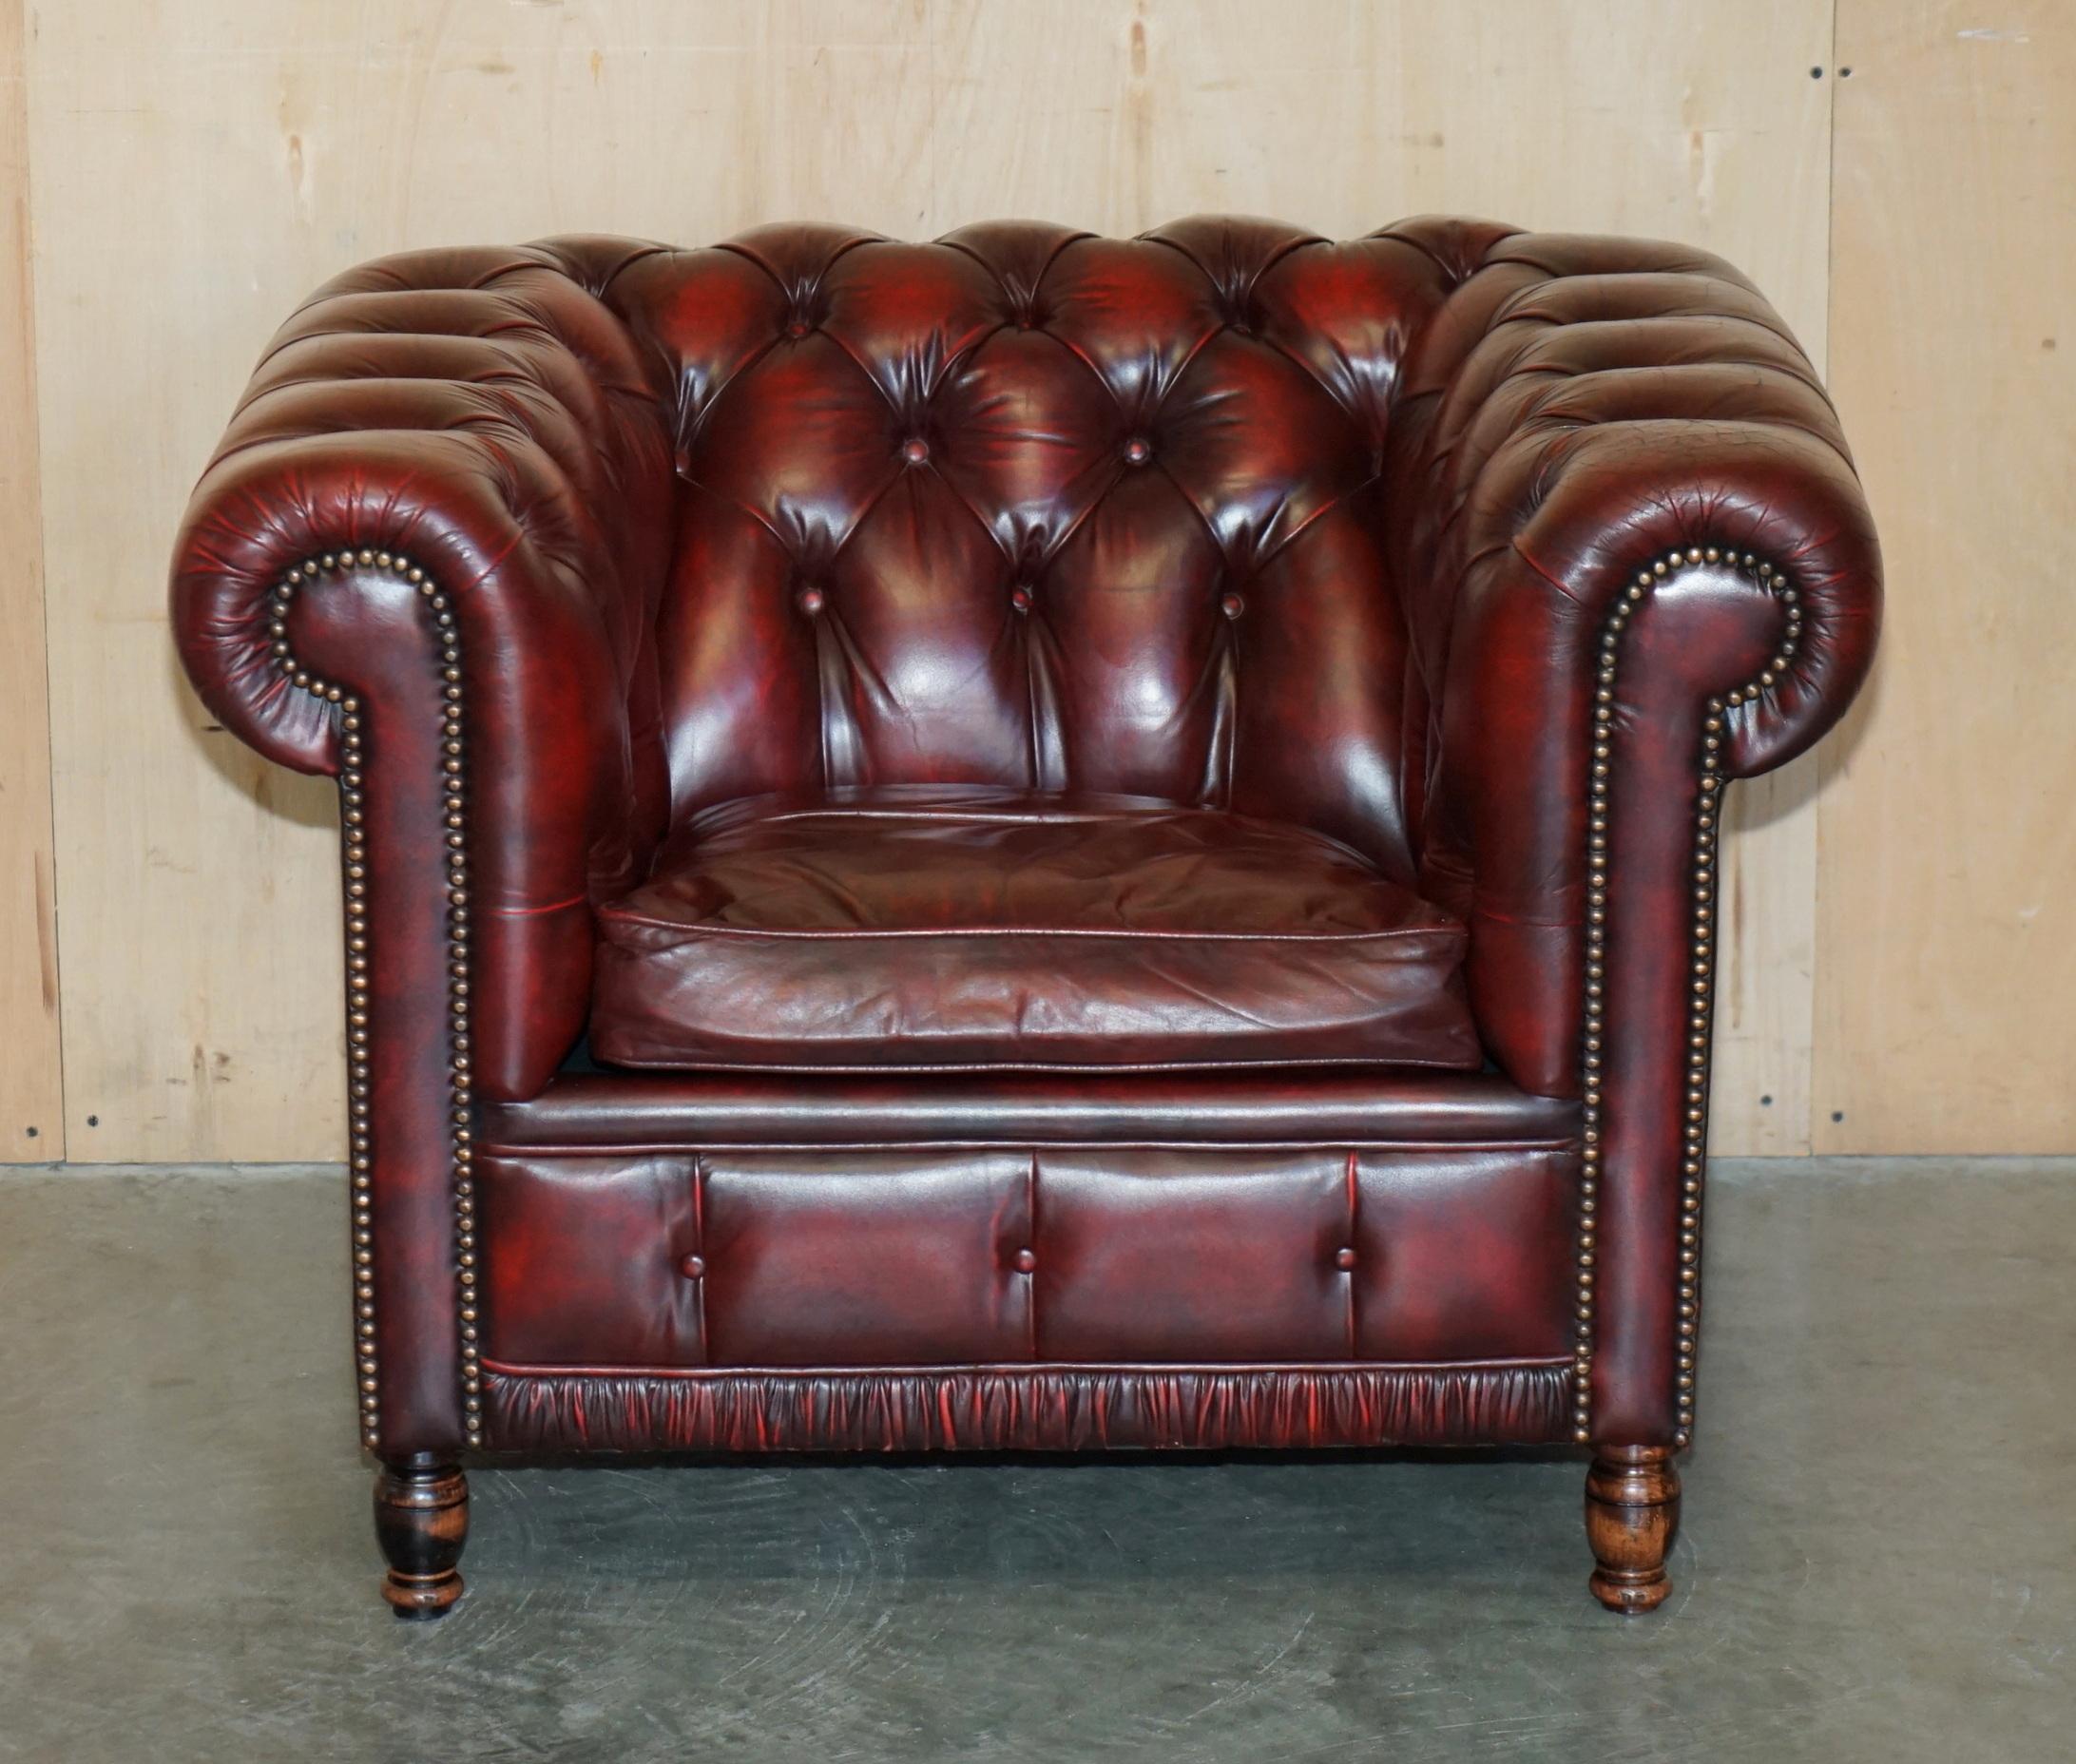 PAIR OF ViNTAGE OXBLOOD LEATHER CHESTERFIELD CLUB ARMCHAIRS WITH ELEGANT LEGS 8